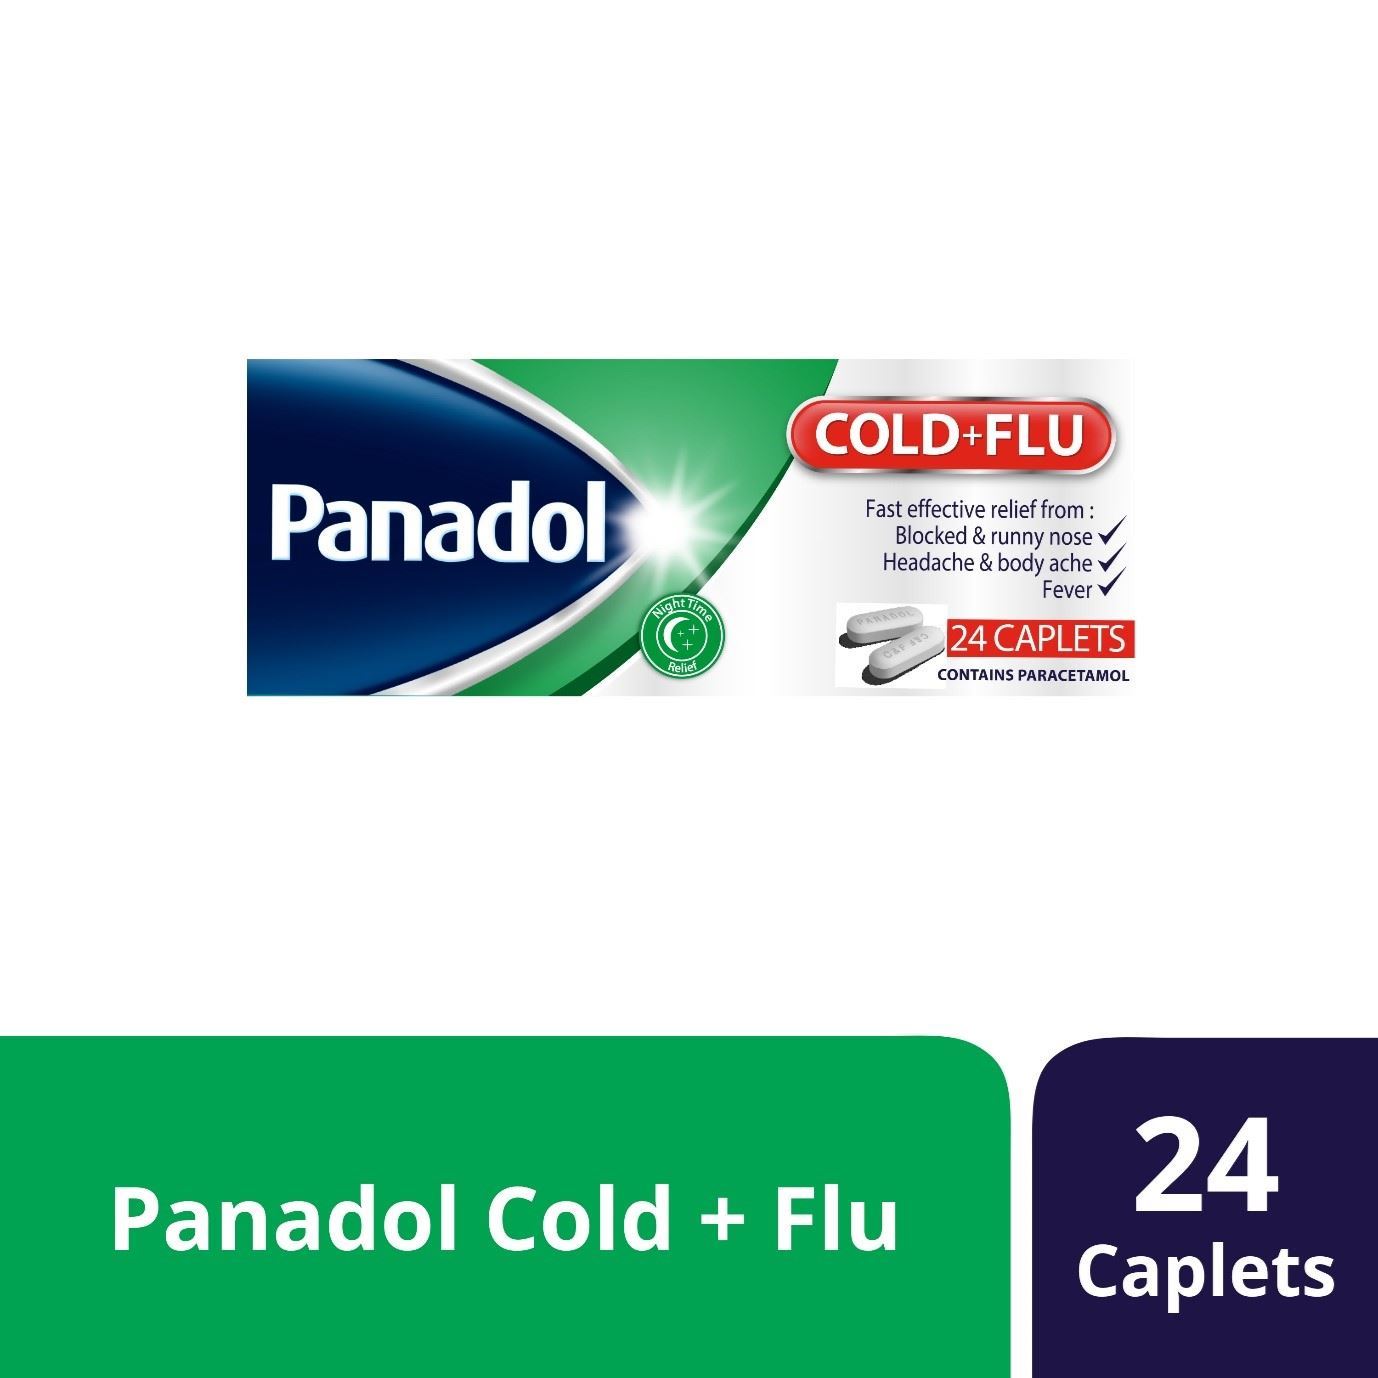 PANADOL COLD + FLU NIGHT RELIEF 24 TABLETS